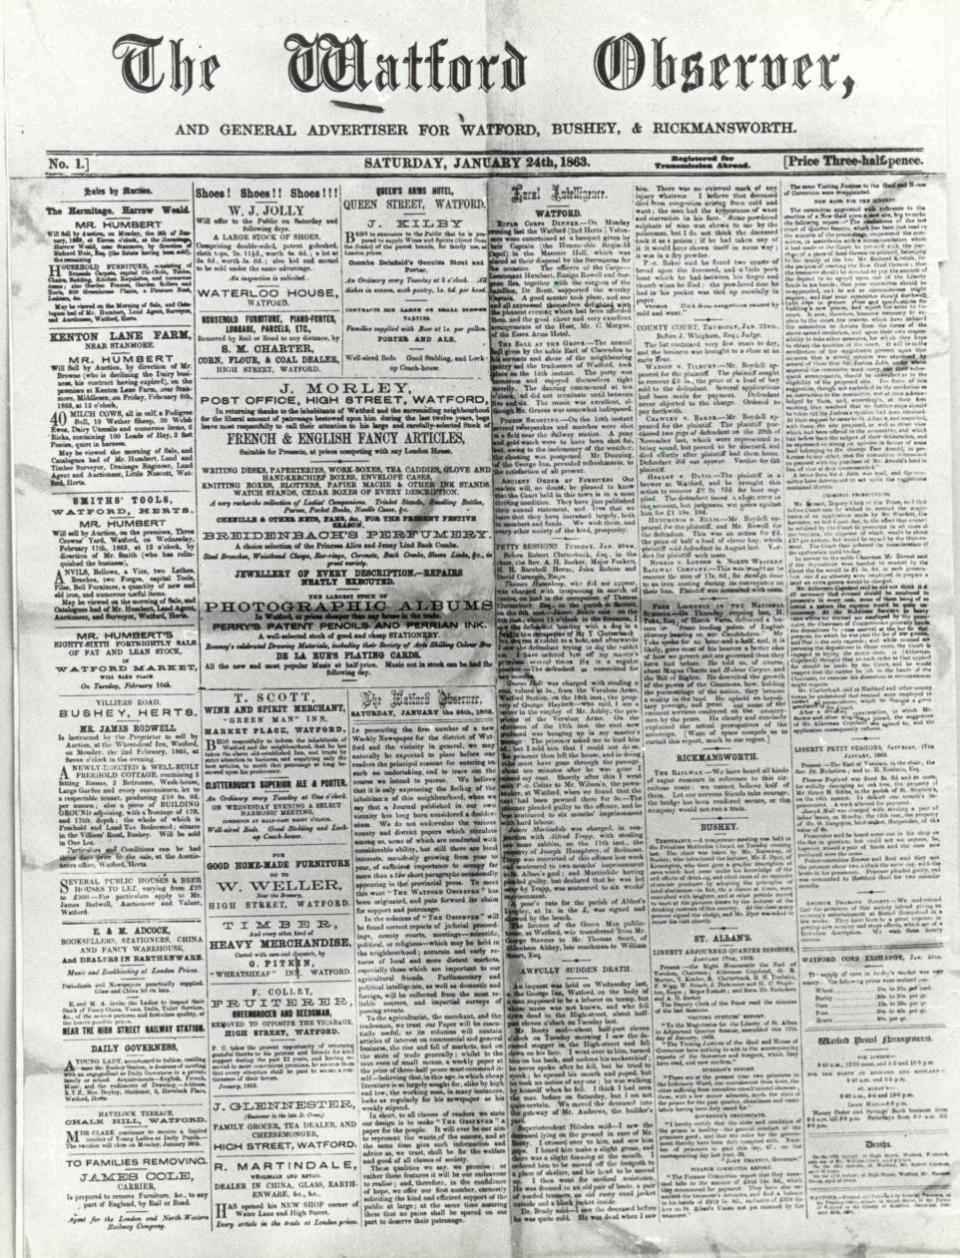 Watford Observer: The first four-page issue was published on January 24, 1863